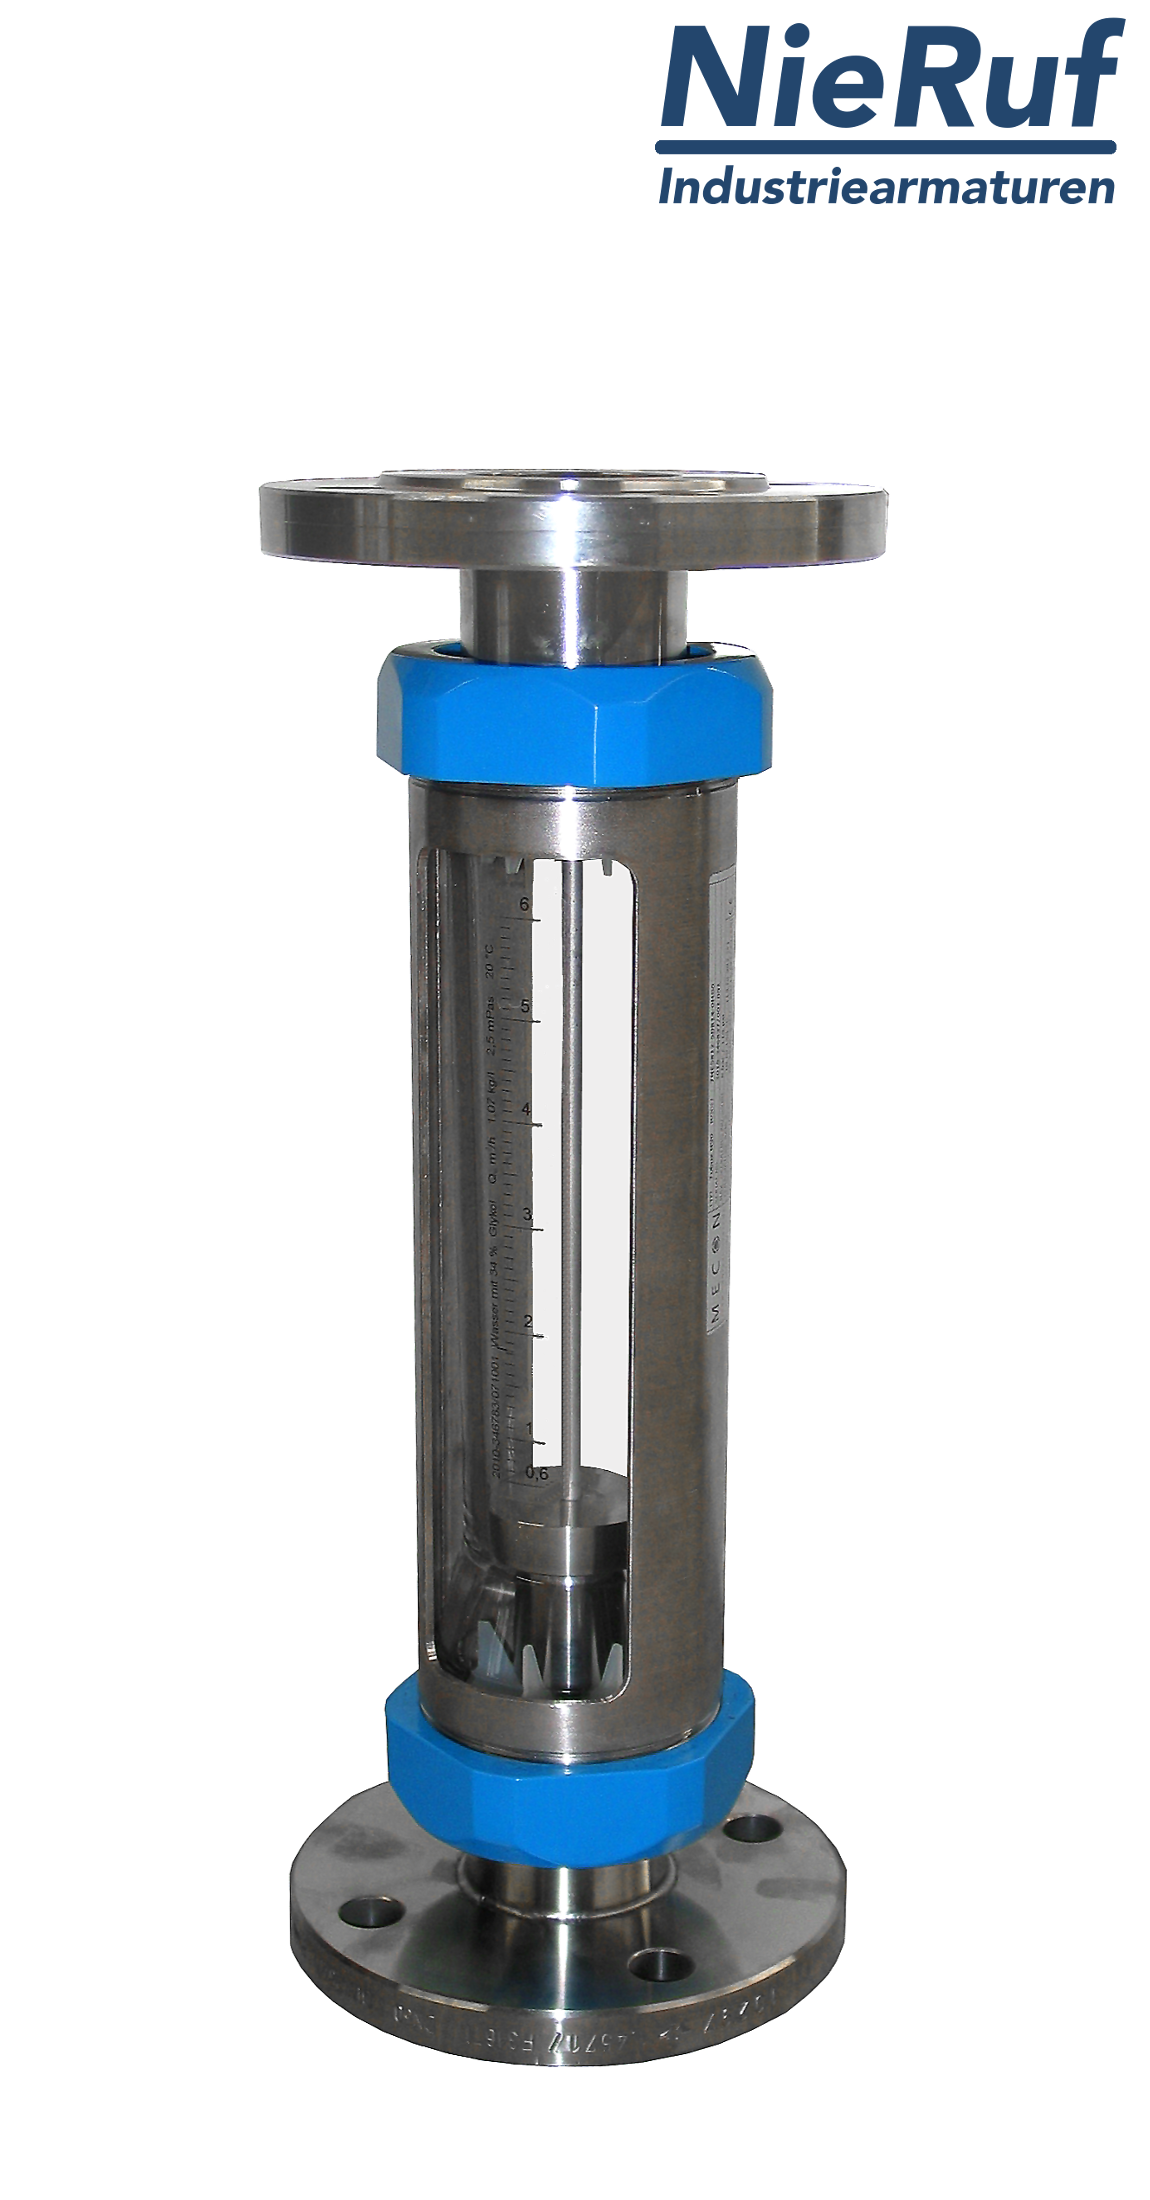 Variable area flowmeter stainless steel + borosilicate flange DN15 0.1 - 1.0 l/h water FKM